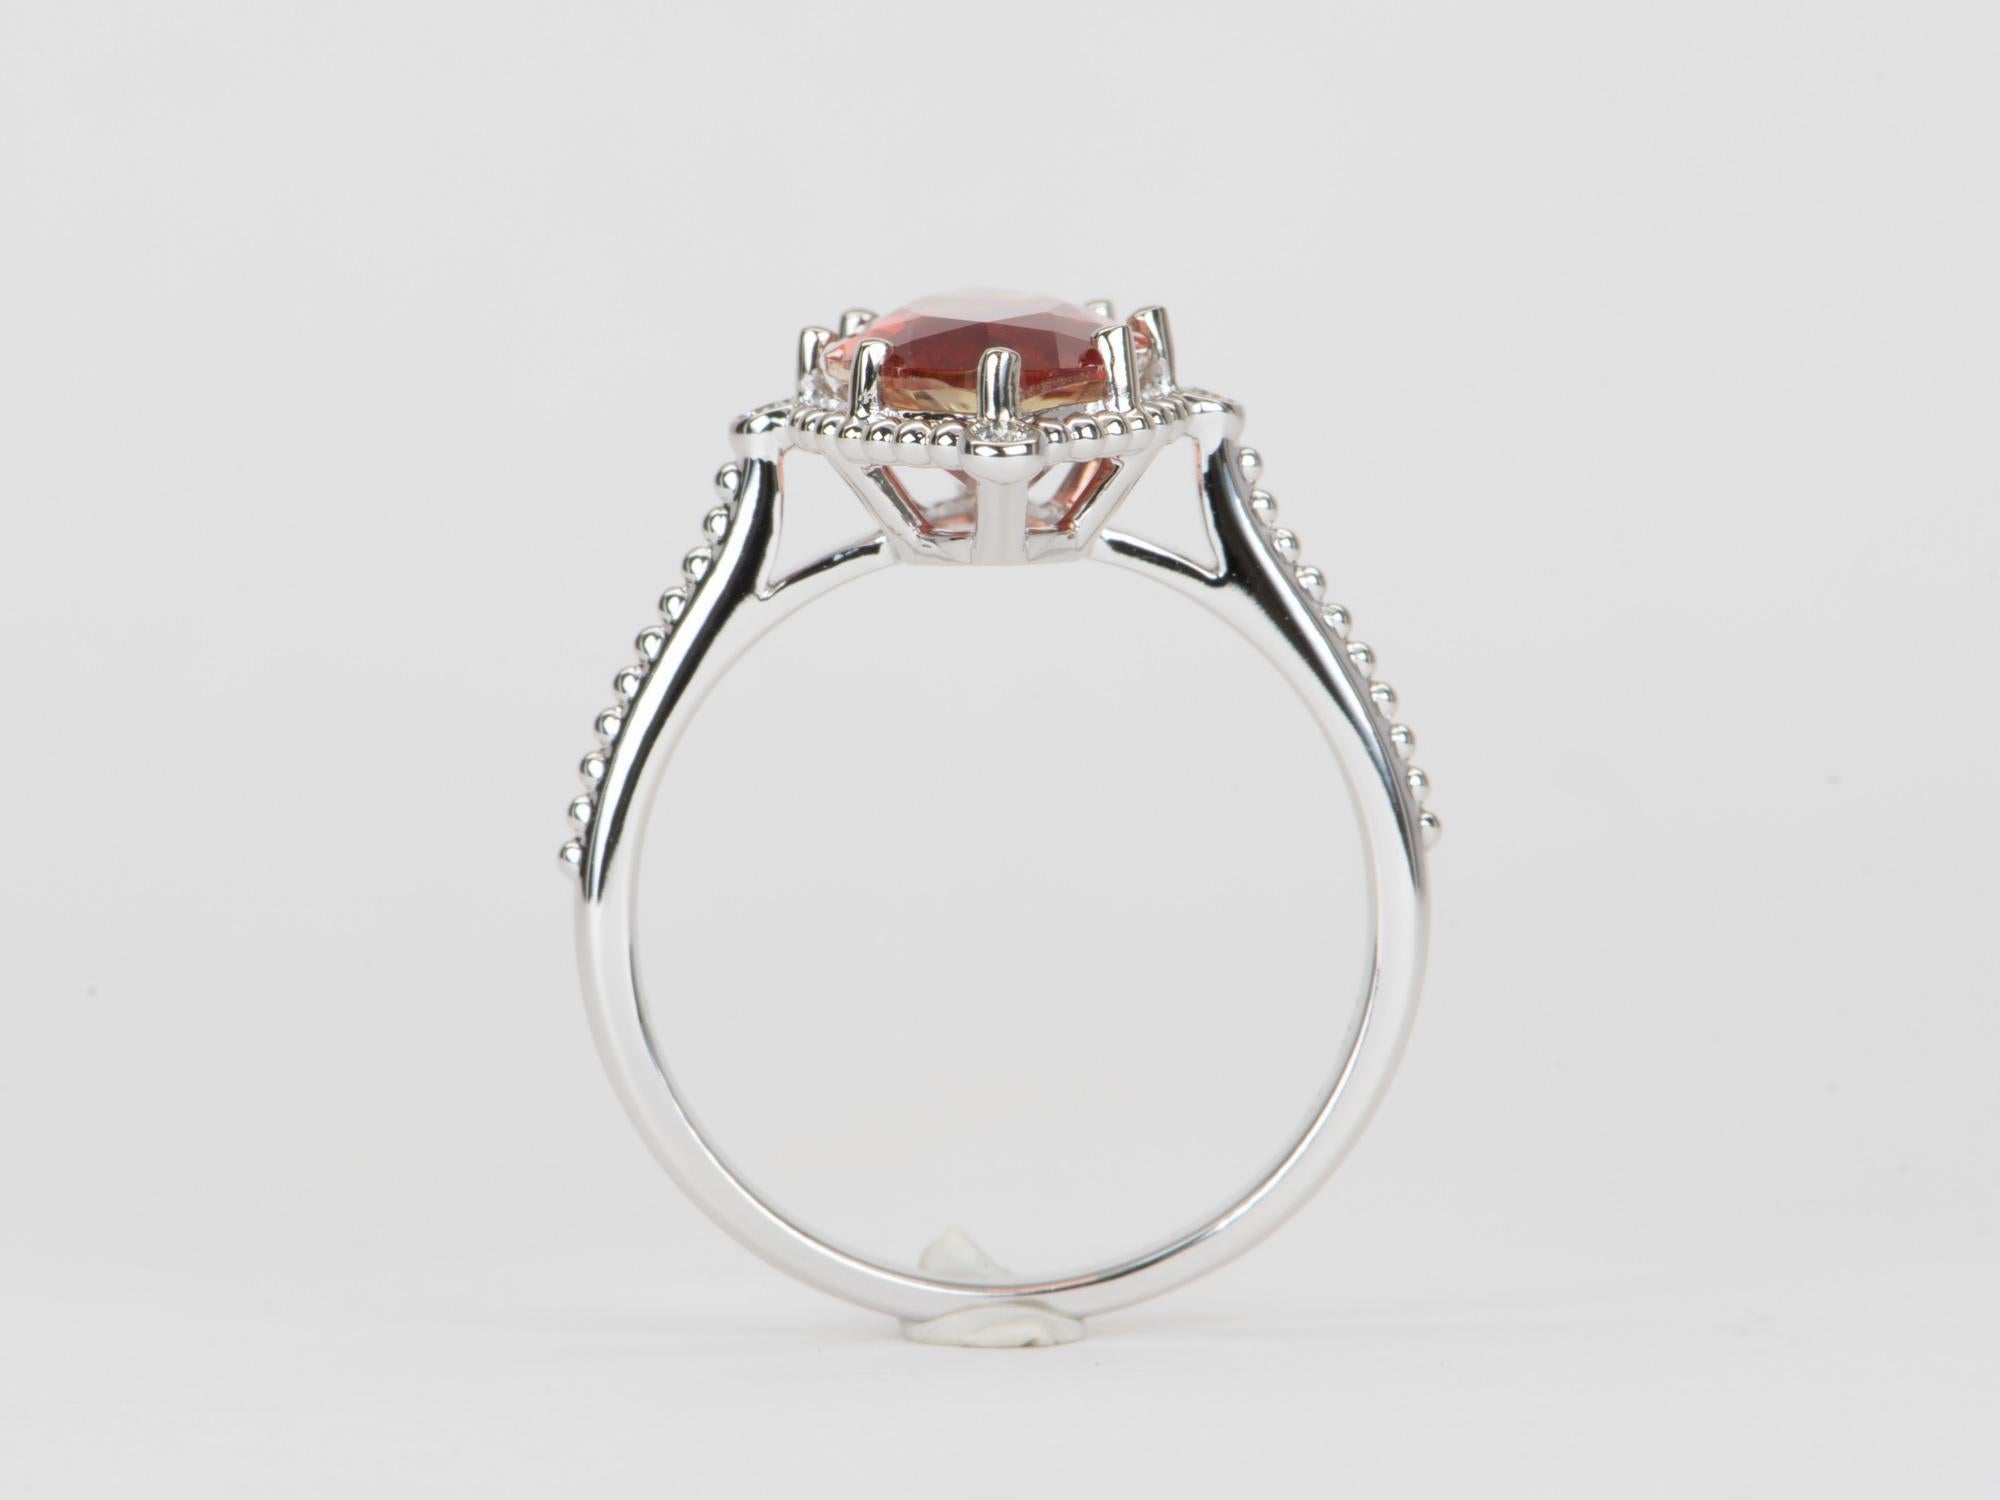 Uncut 3.25ct Bright Red Oregon Sunstone with Diamonds 14K White Gold Engagement Ring For Sale